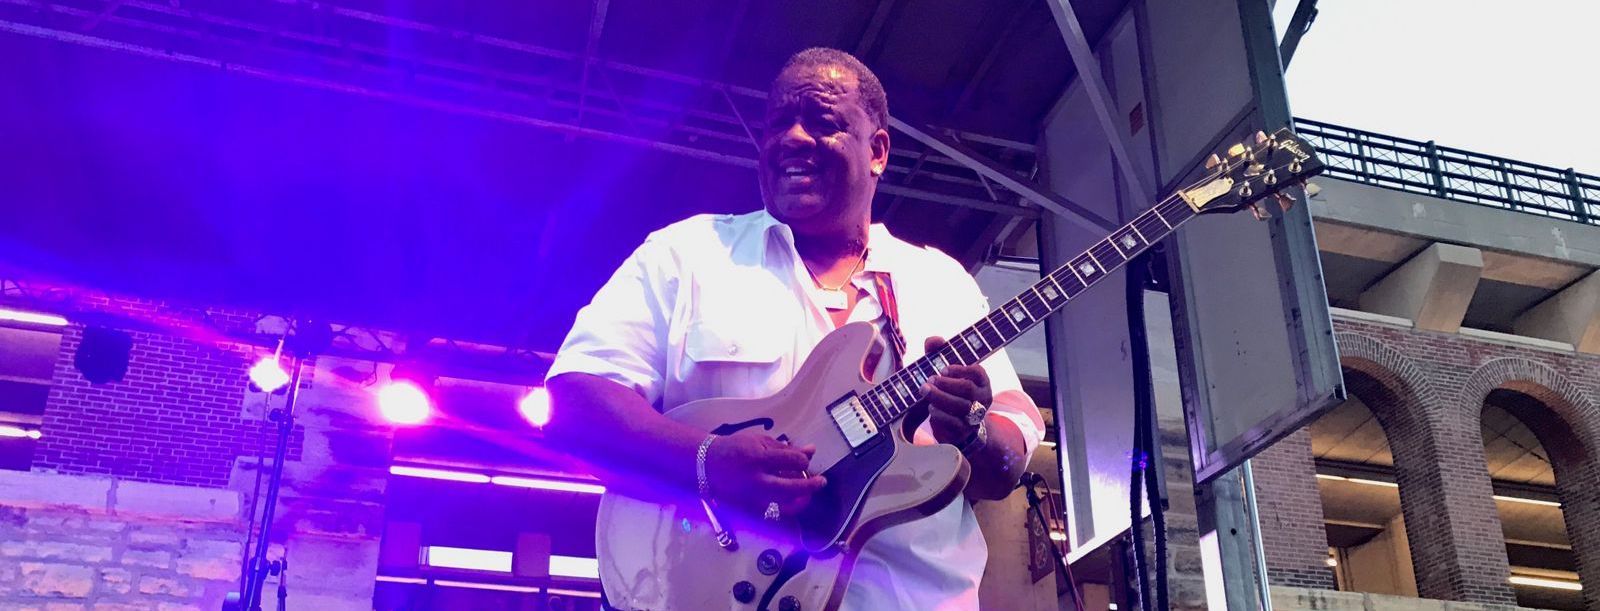 A man playing the electric guitar at a St. Louis concert